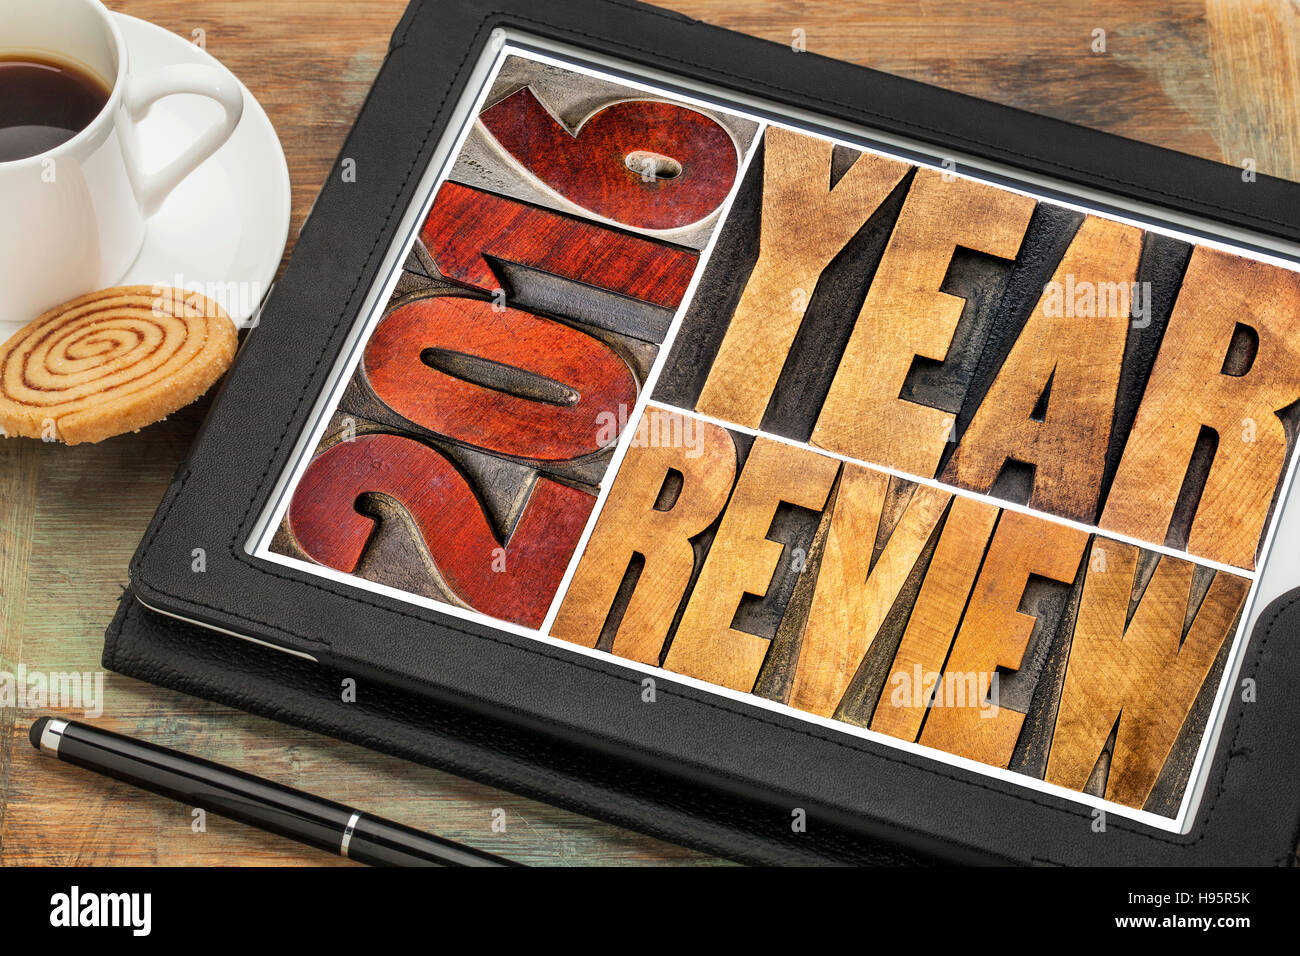 2016 review banner - annual review or summary of the recent year - word abstract in vintage letterpress wood type blocks on a digital tablet Stock Photo